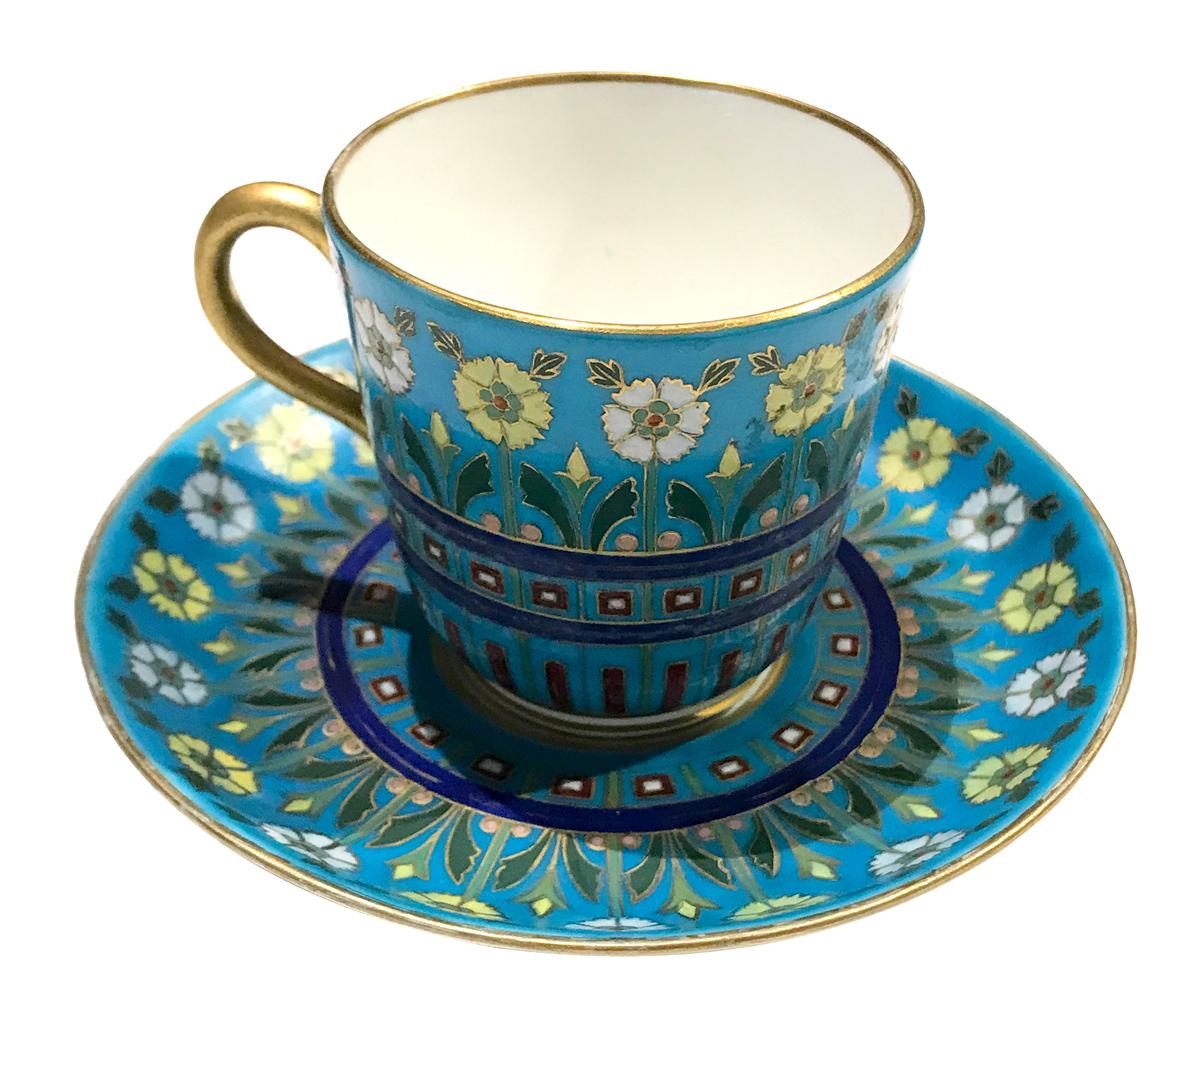 Exquisite Minton cloisonné style ware tea cup with its saucer. This porcelain set is decorated with the cloisonné style technique with vivid botanical patterns framed with gold. Here, lovely friezes of peonies or daisies on a very typical blue